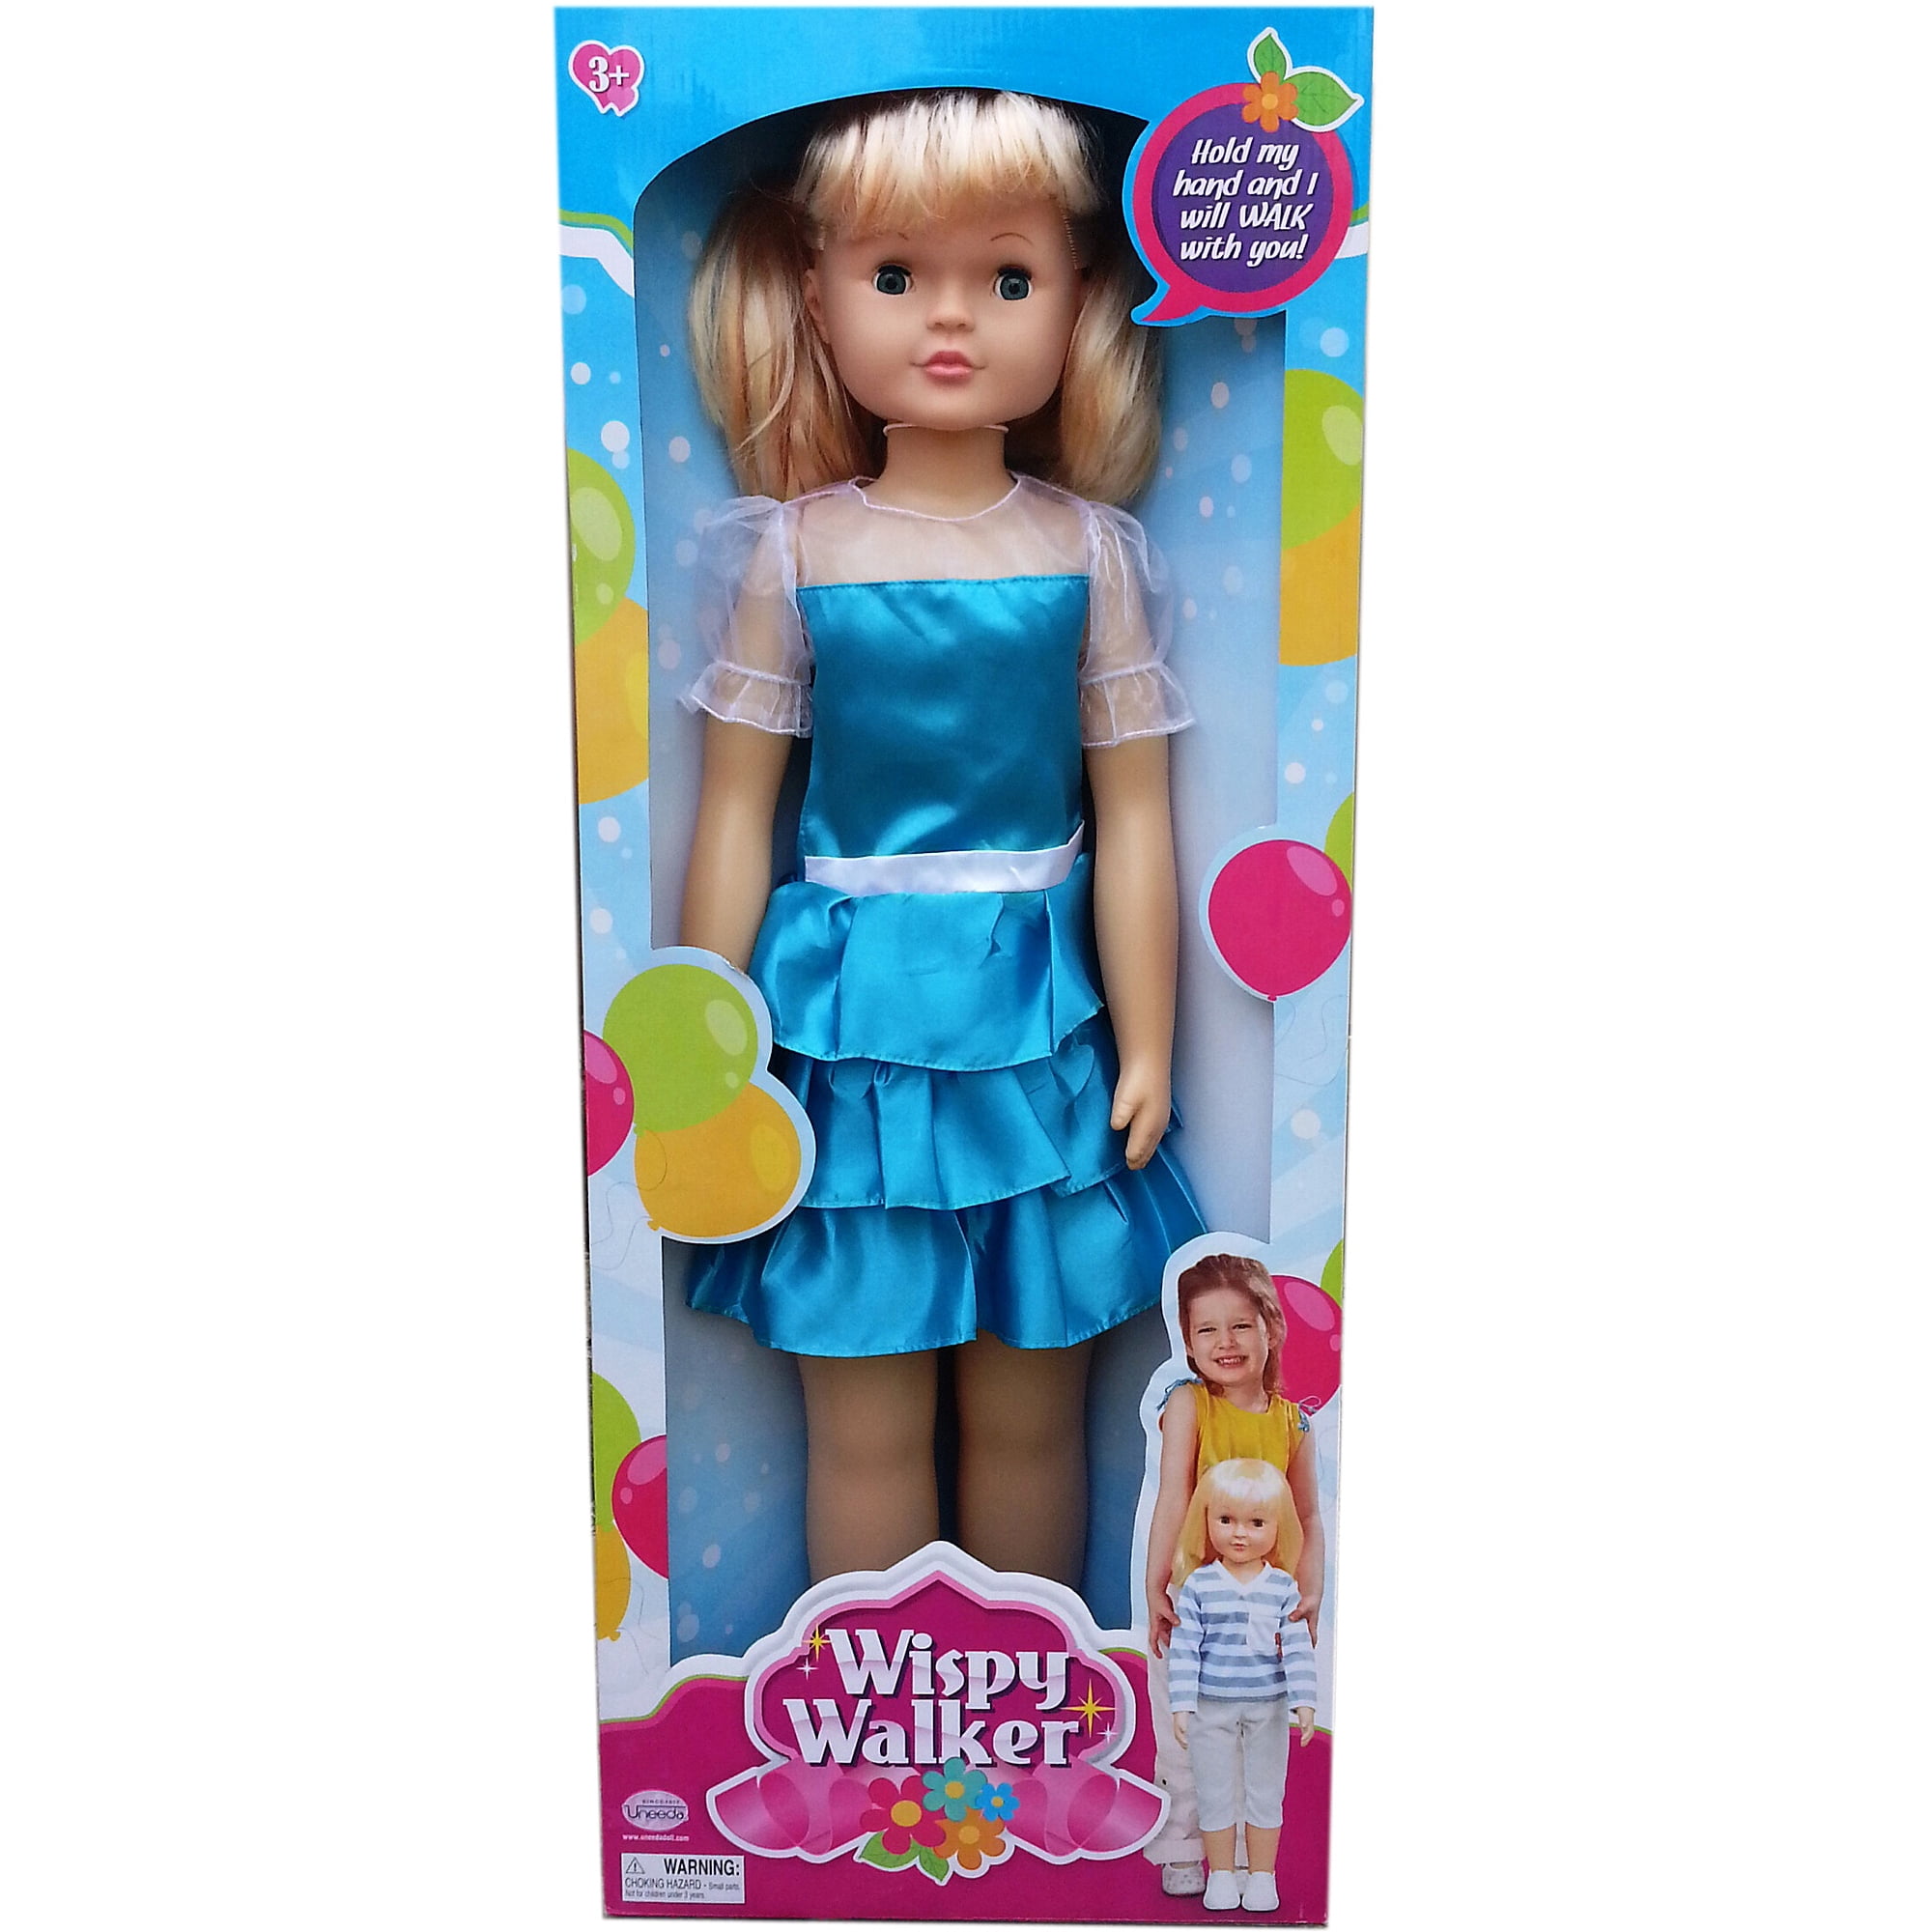 doll that walks with you